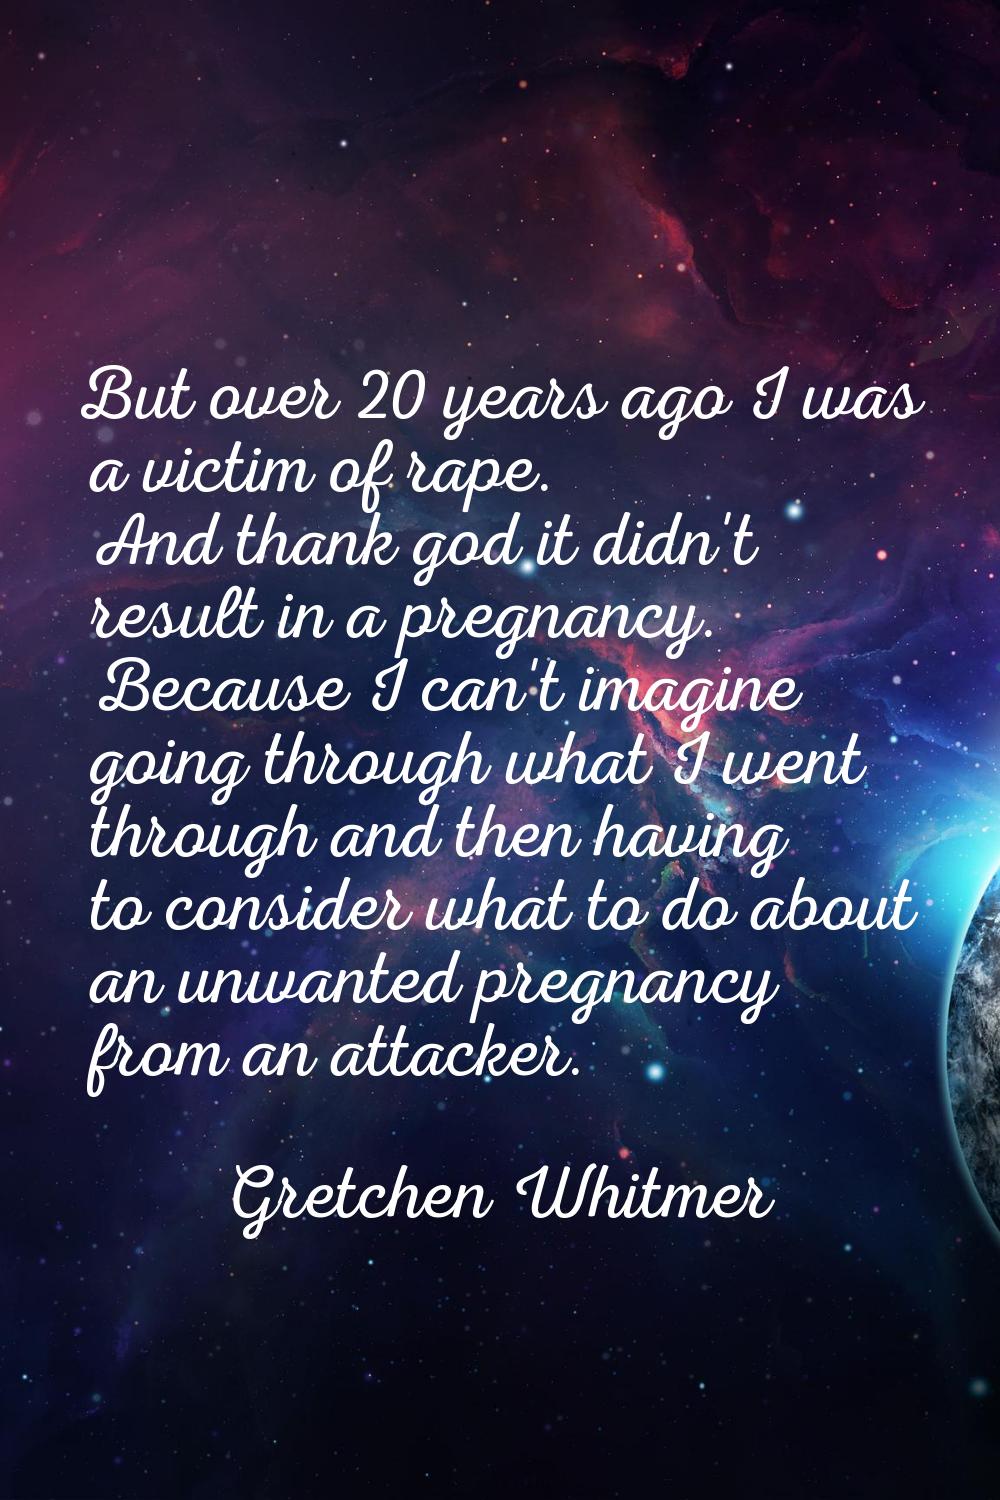 But over 20 years ago I was a victim of rape. And thank god it didn't result in a pregnancy. Becaus